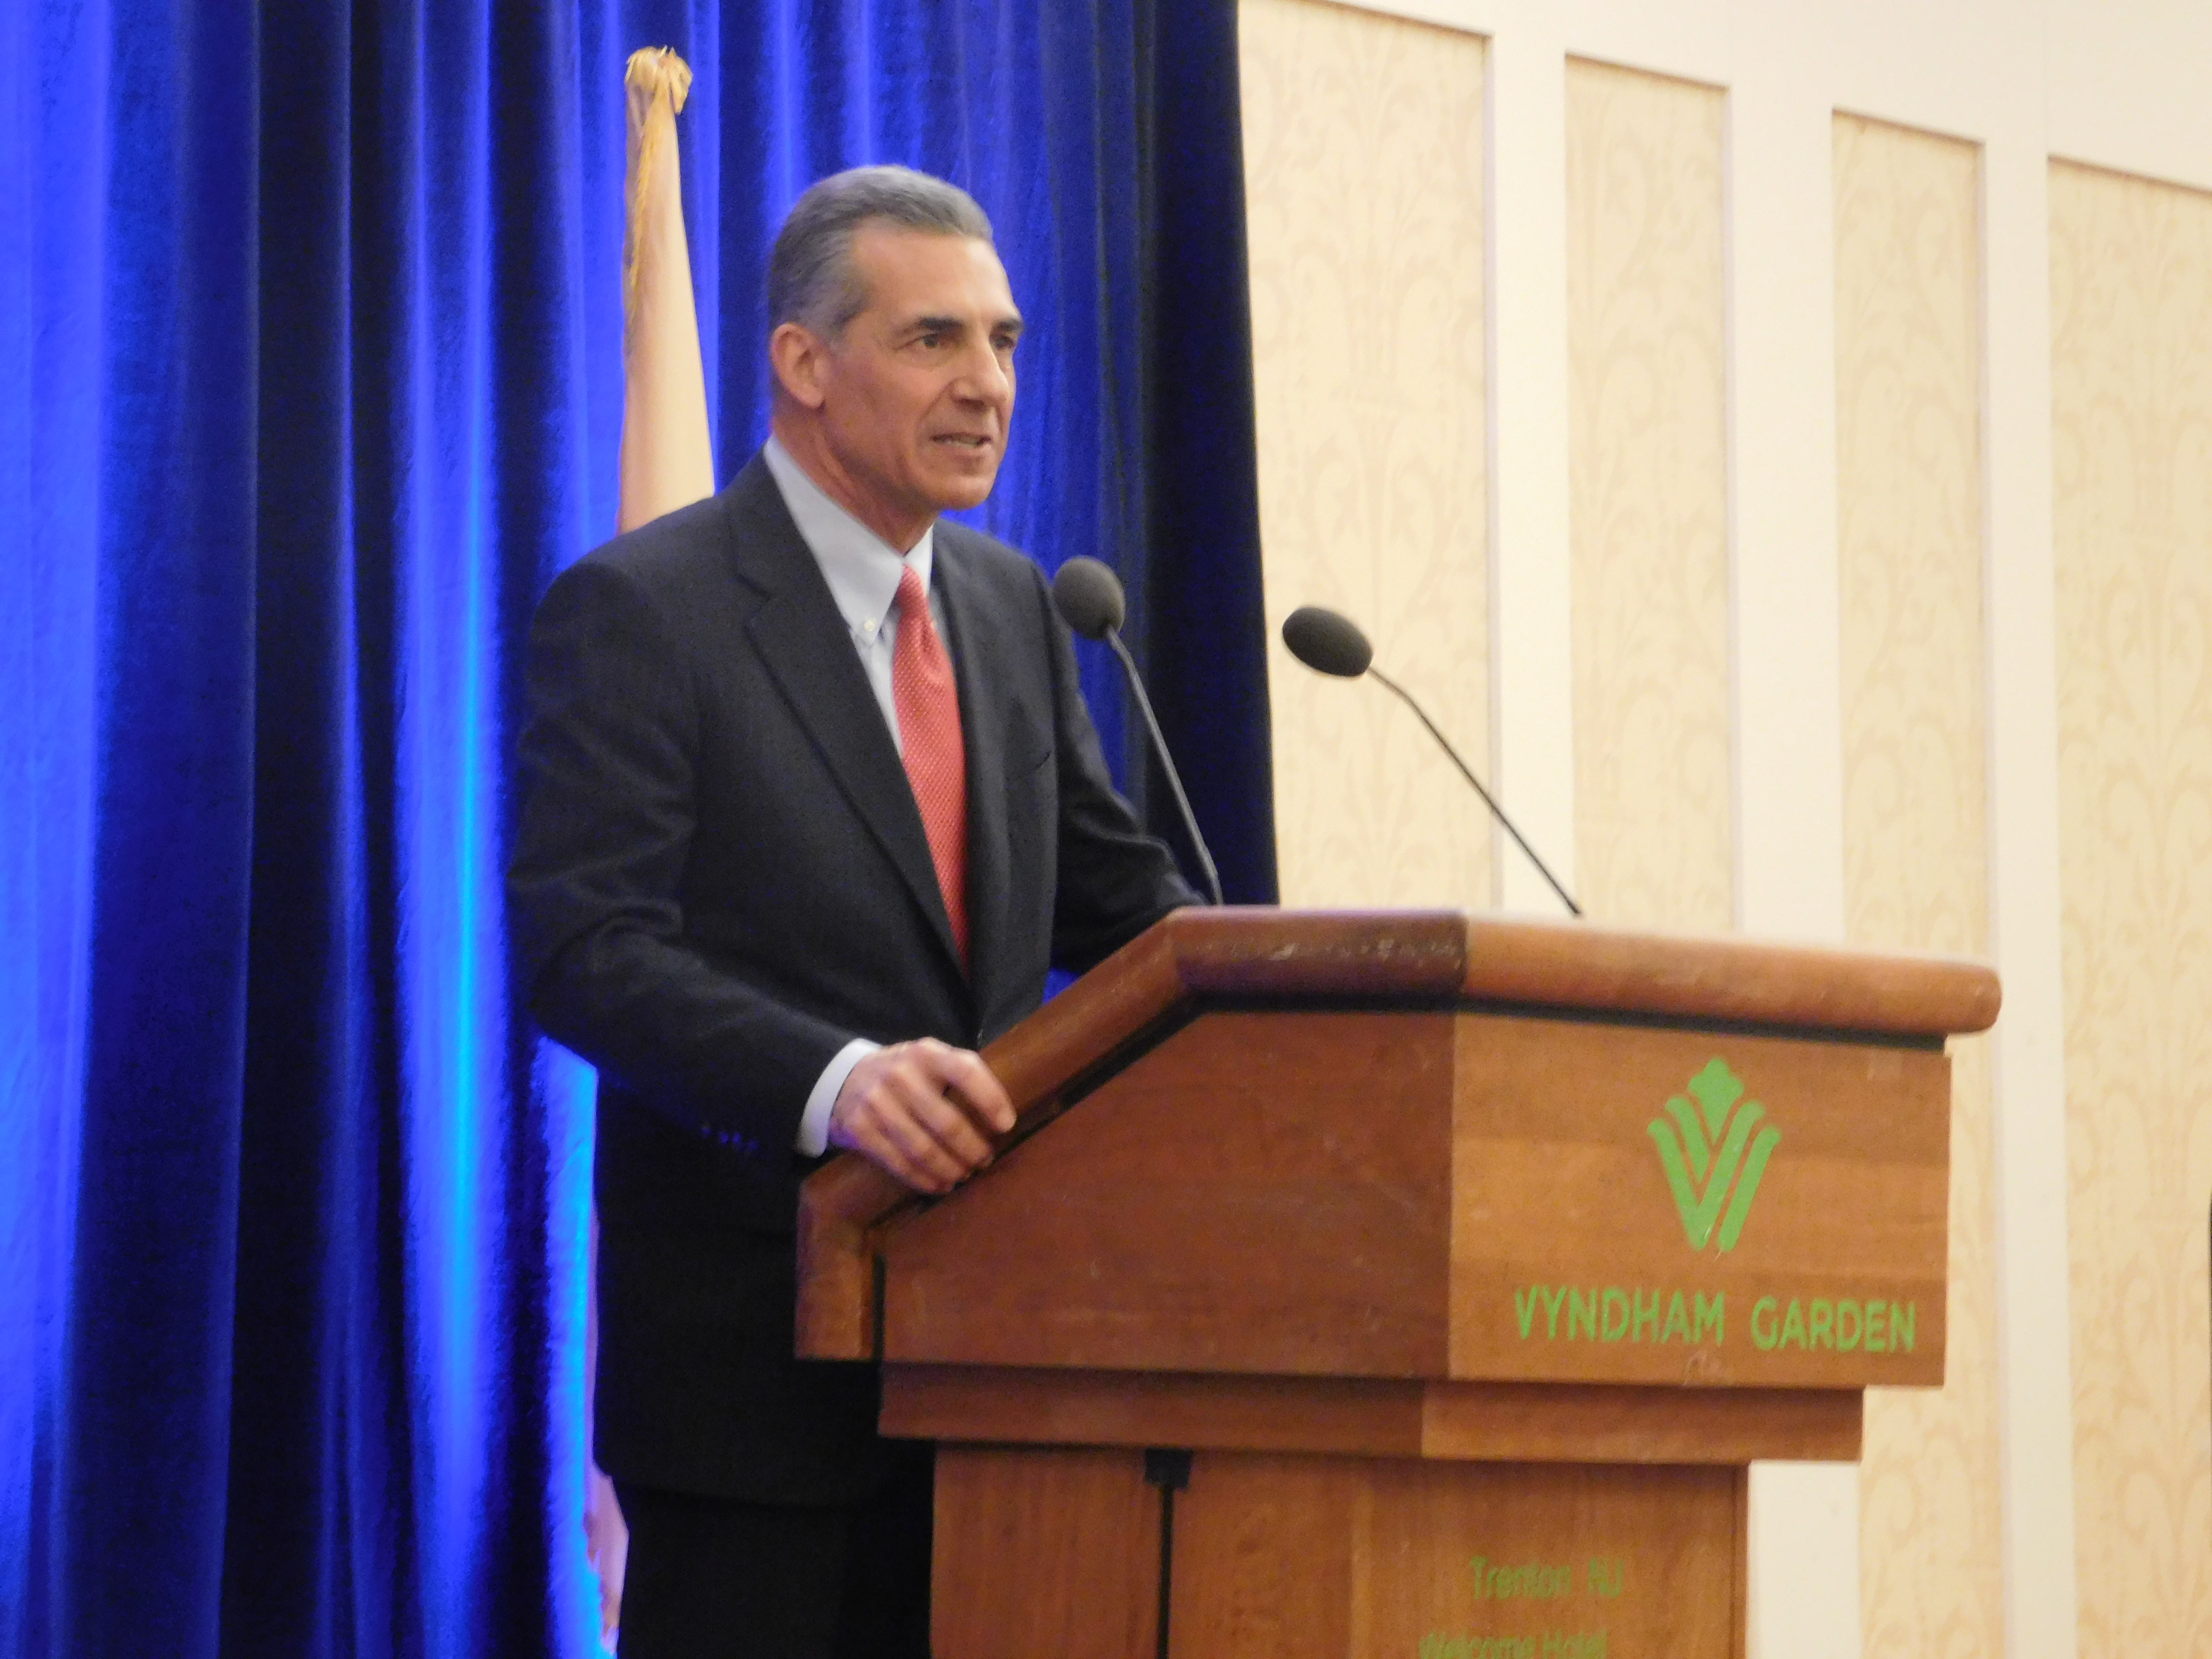 Assemblyman Jack Ciattarelli was the only Republican candidate to speak at the event. 